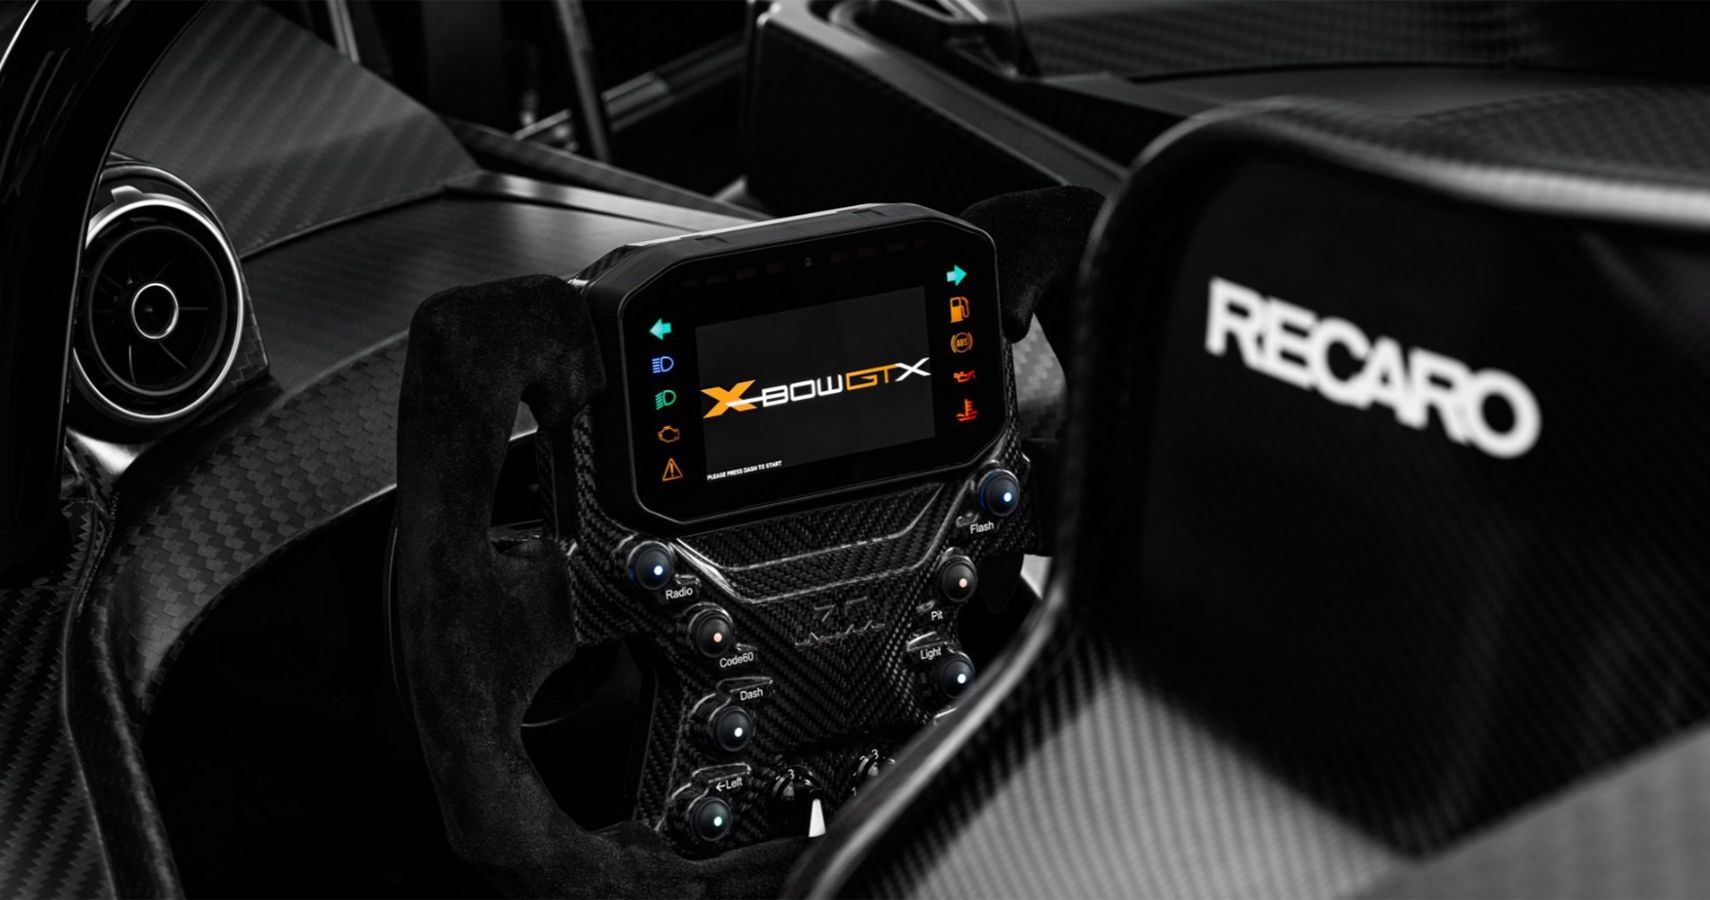 KTM X-BOW GTX steering wheel competition seats